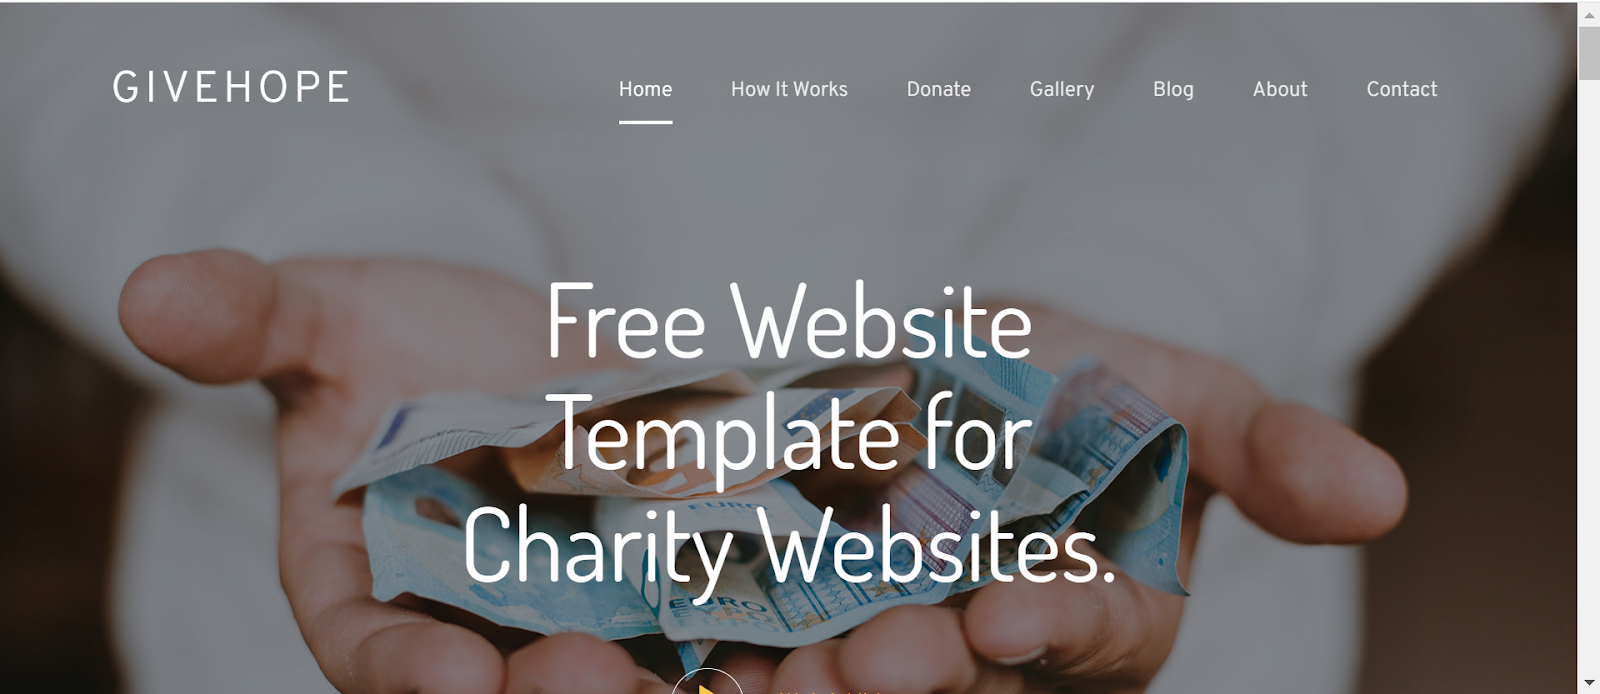 Bootstrap website templates, GiveHope